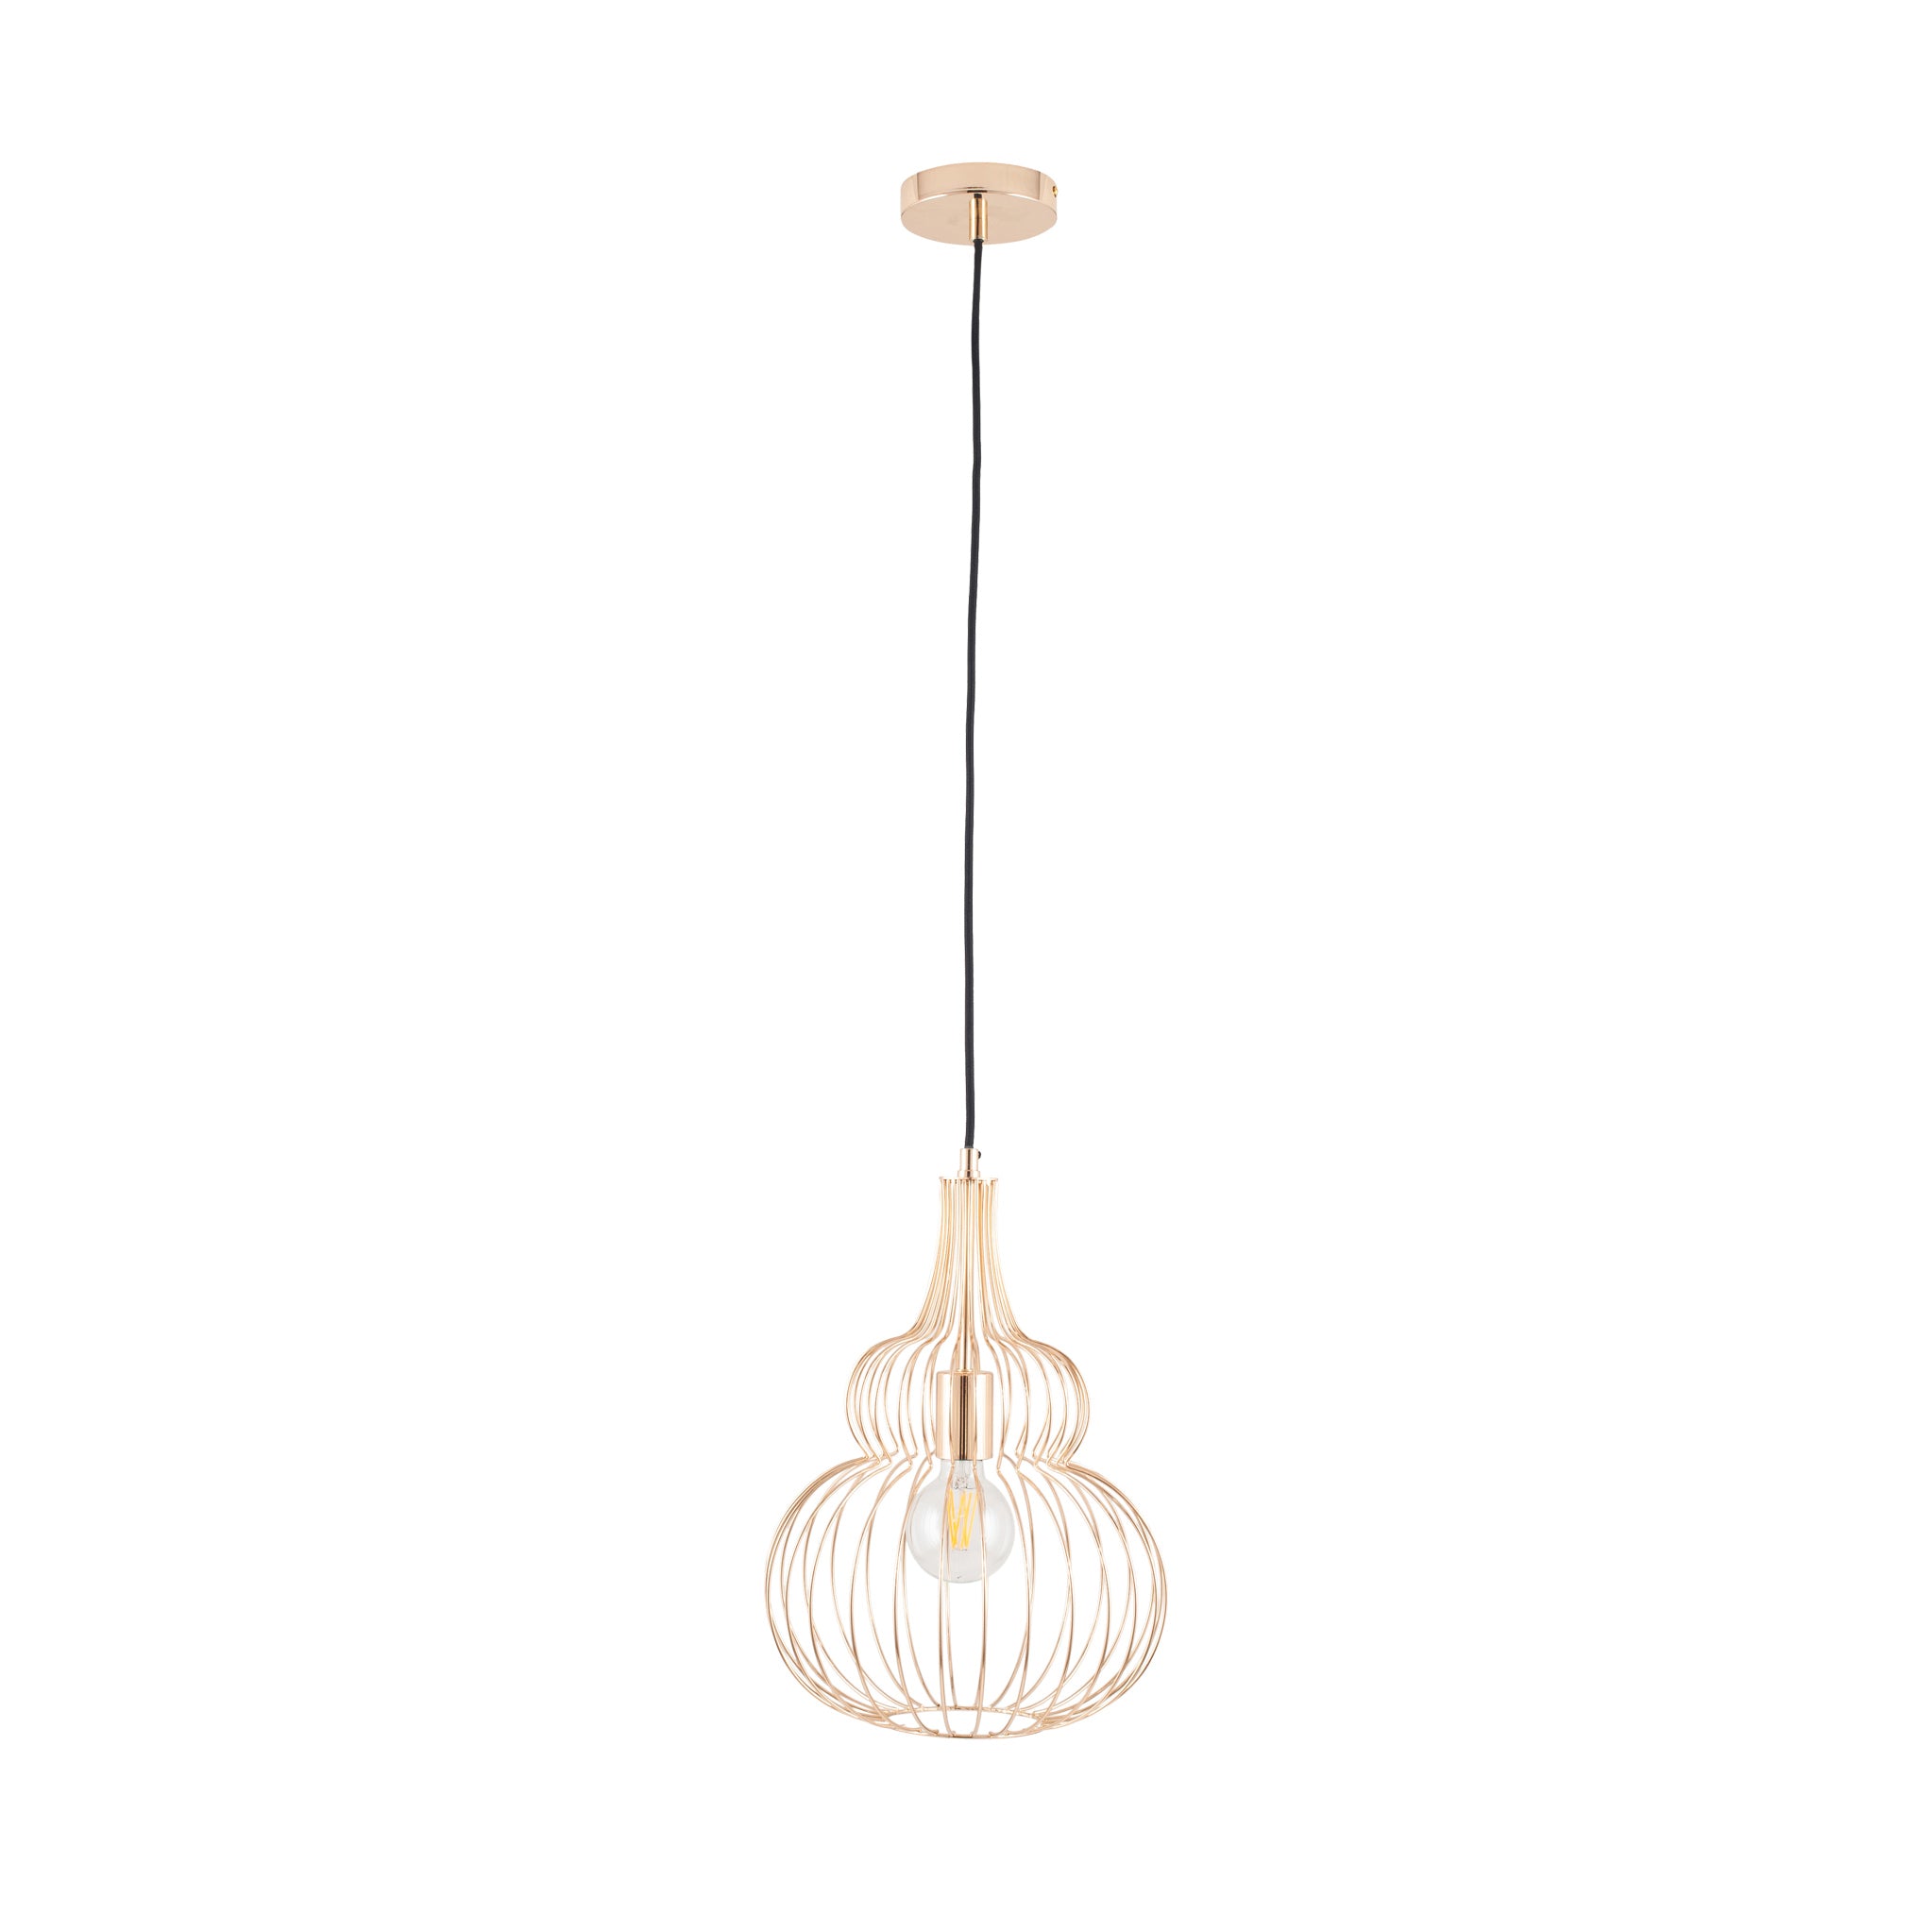 Dania French Gold Metal Wire Shaped Ceiling Light Pendant Roseland